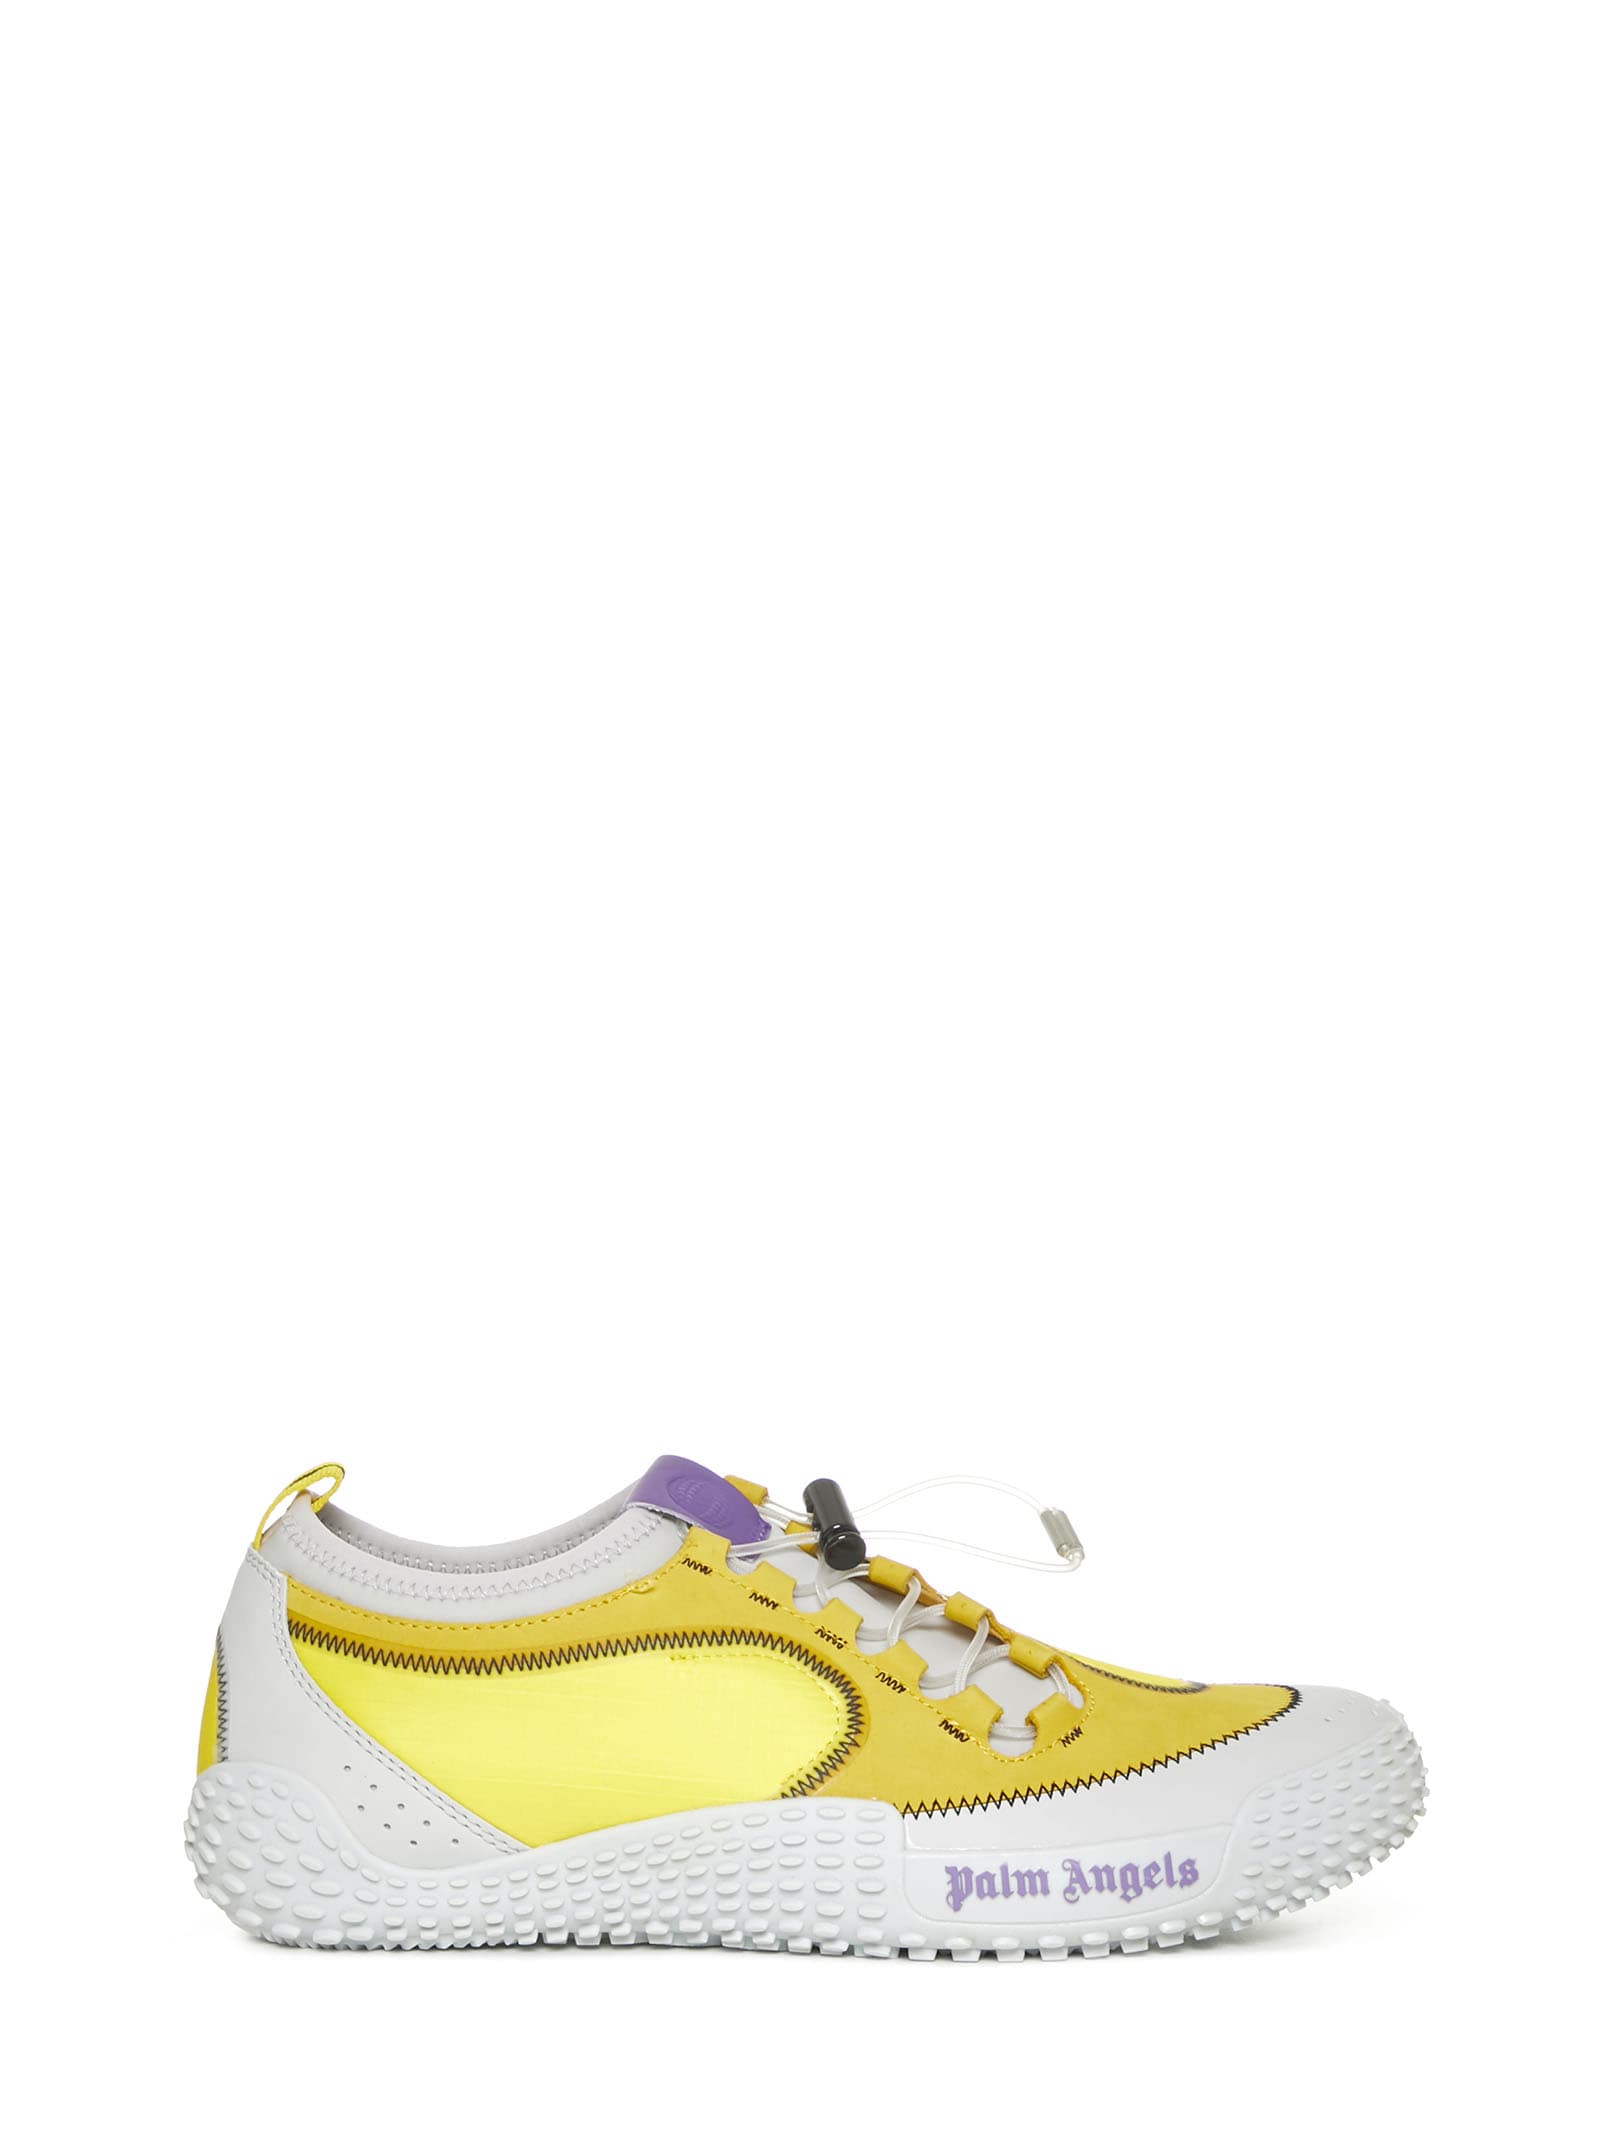 PALM ANGELS SNEAKERS,11262573